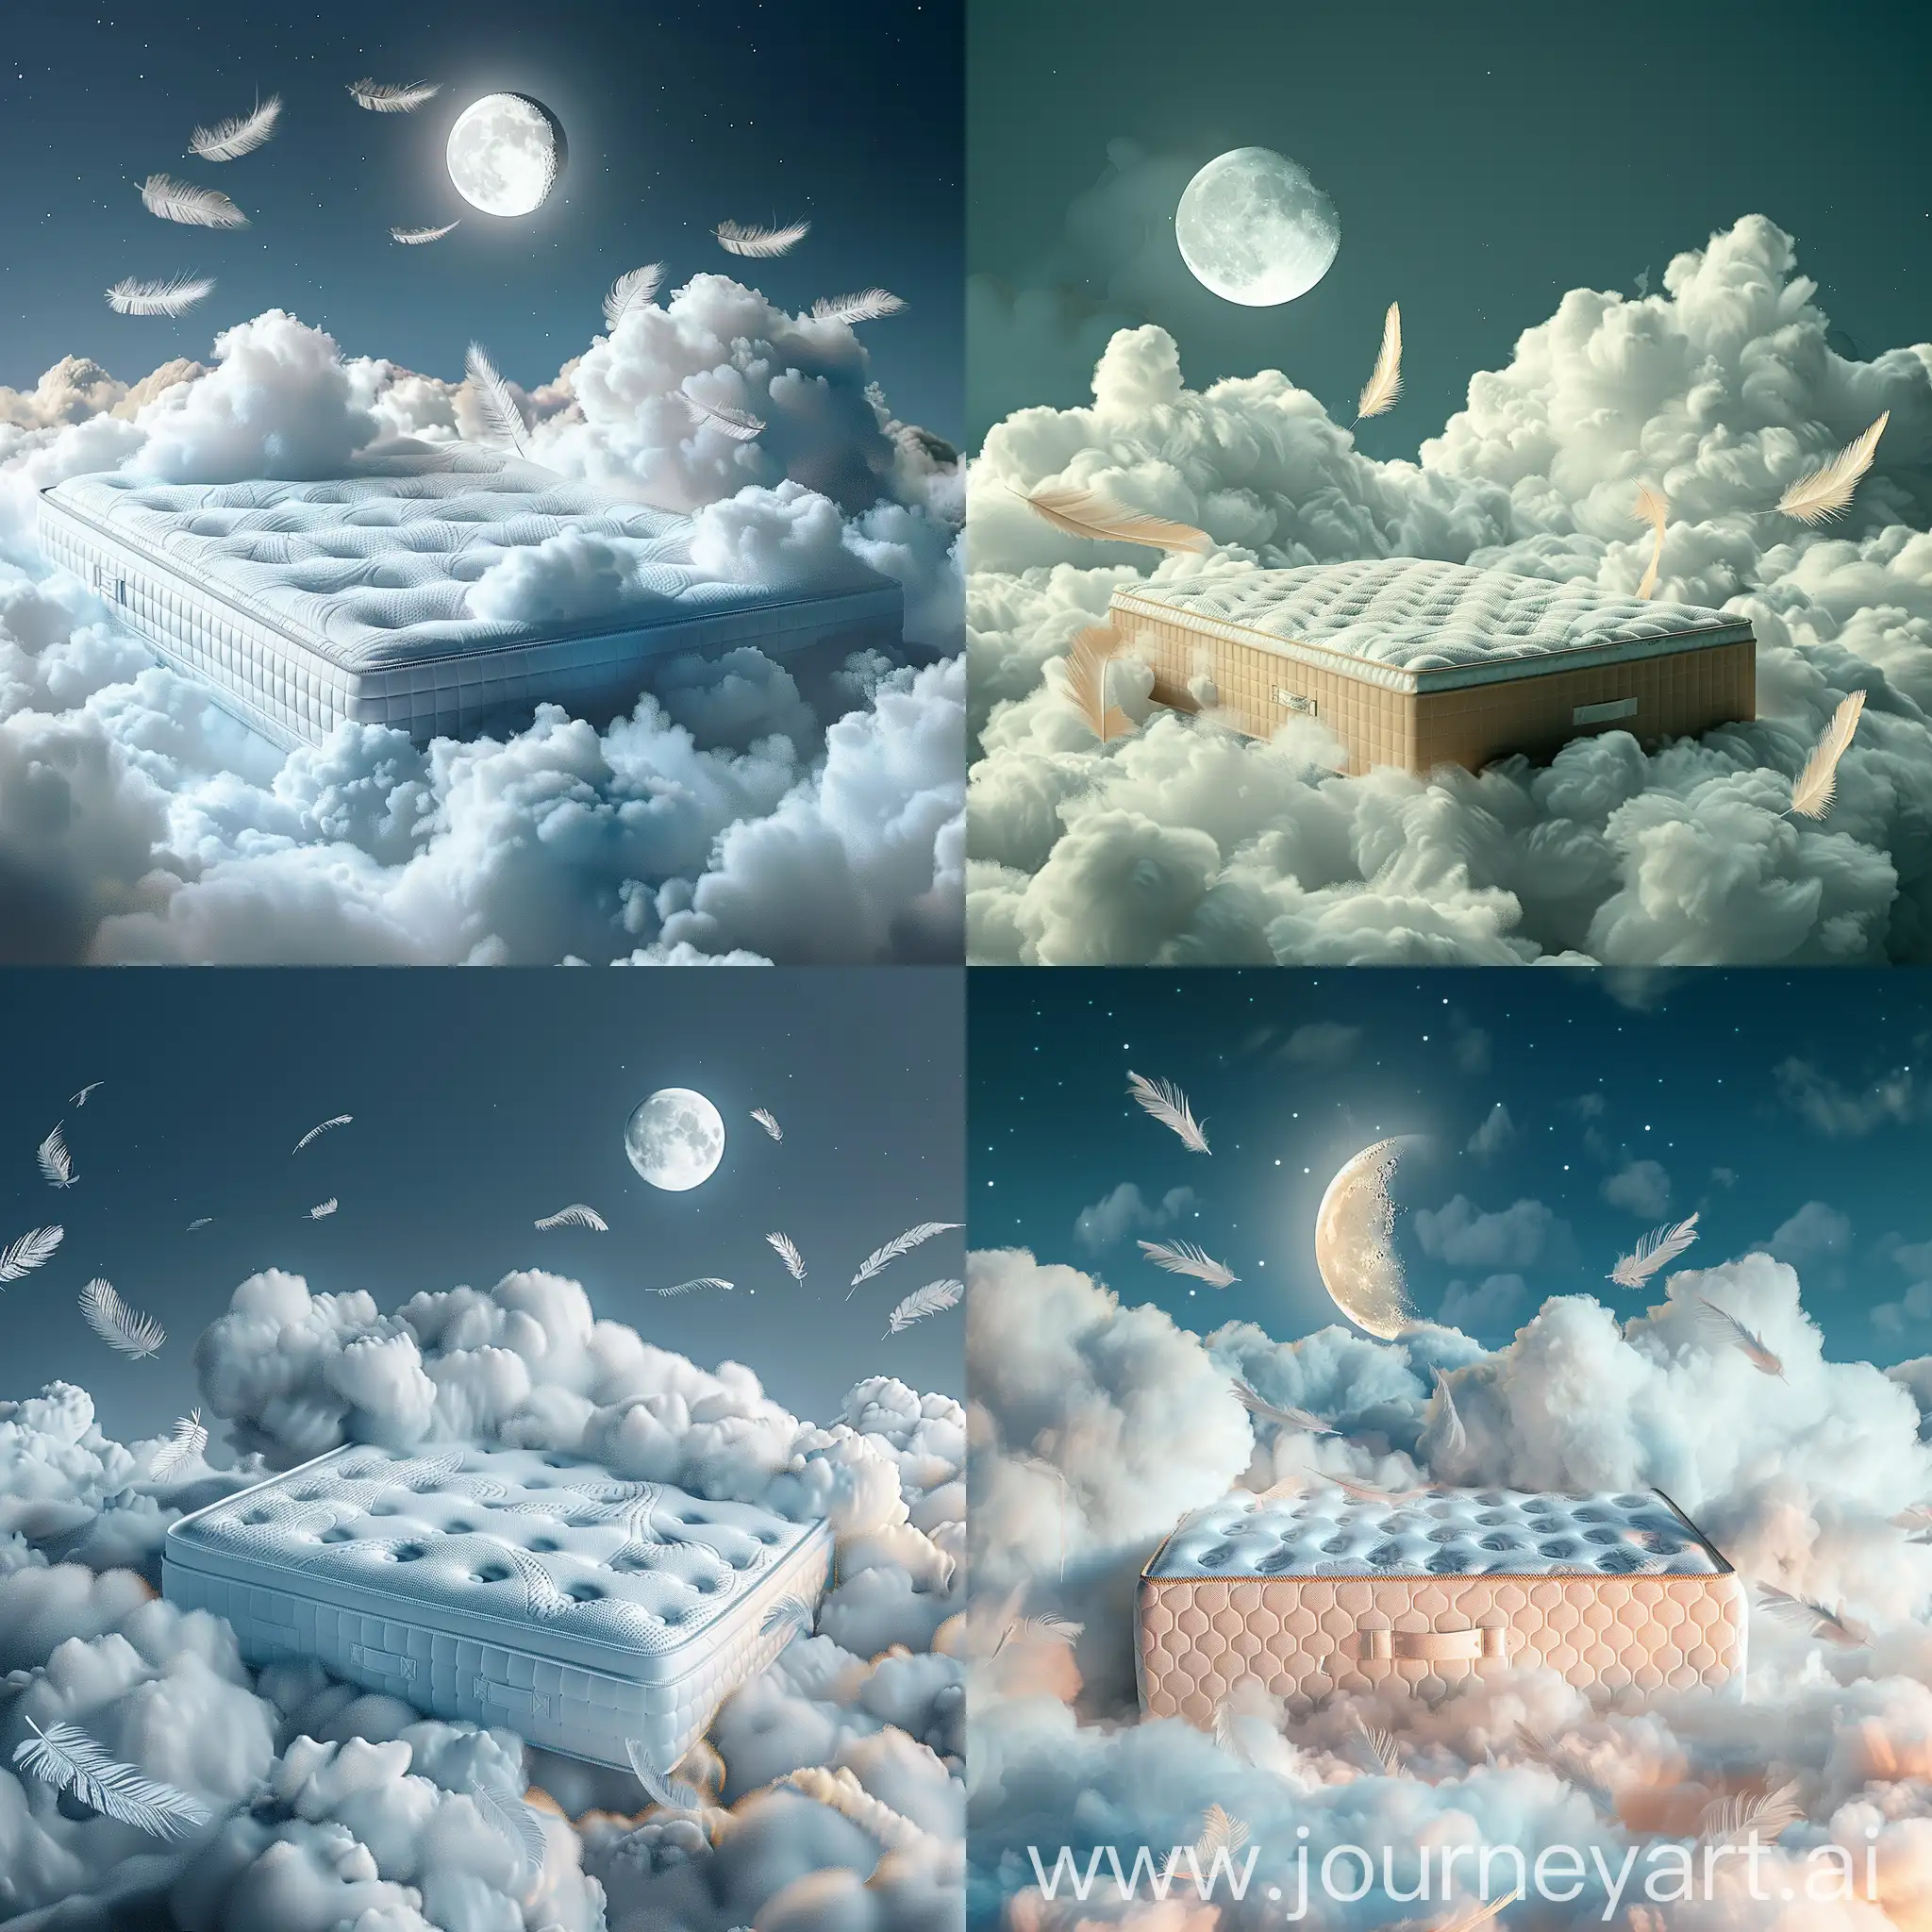 Tranquil-Night-Mattress-Among-Clouds-with-Moon-and-Feathers